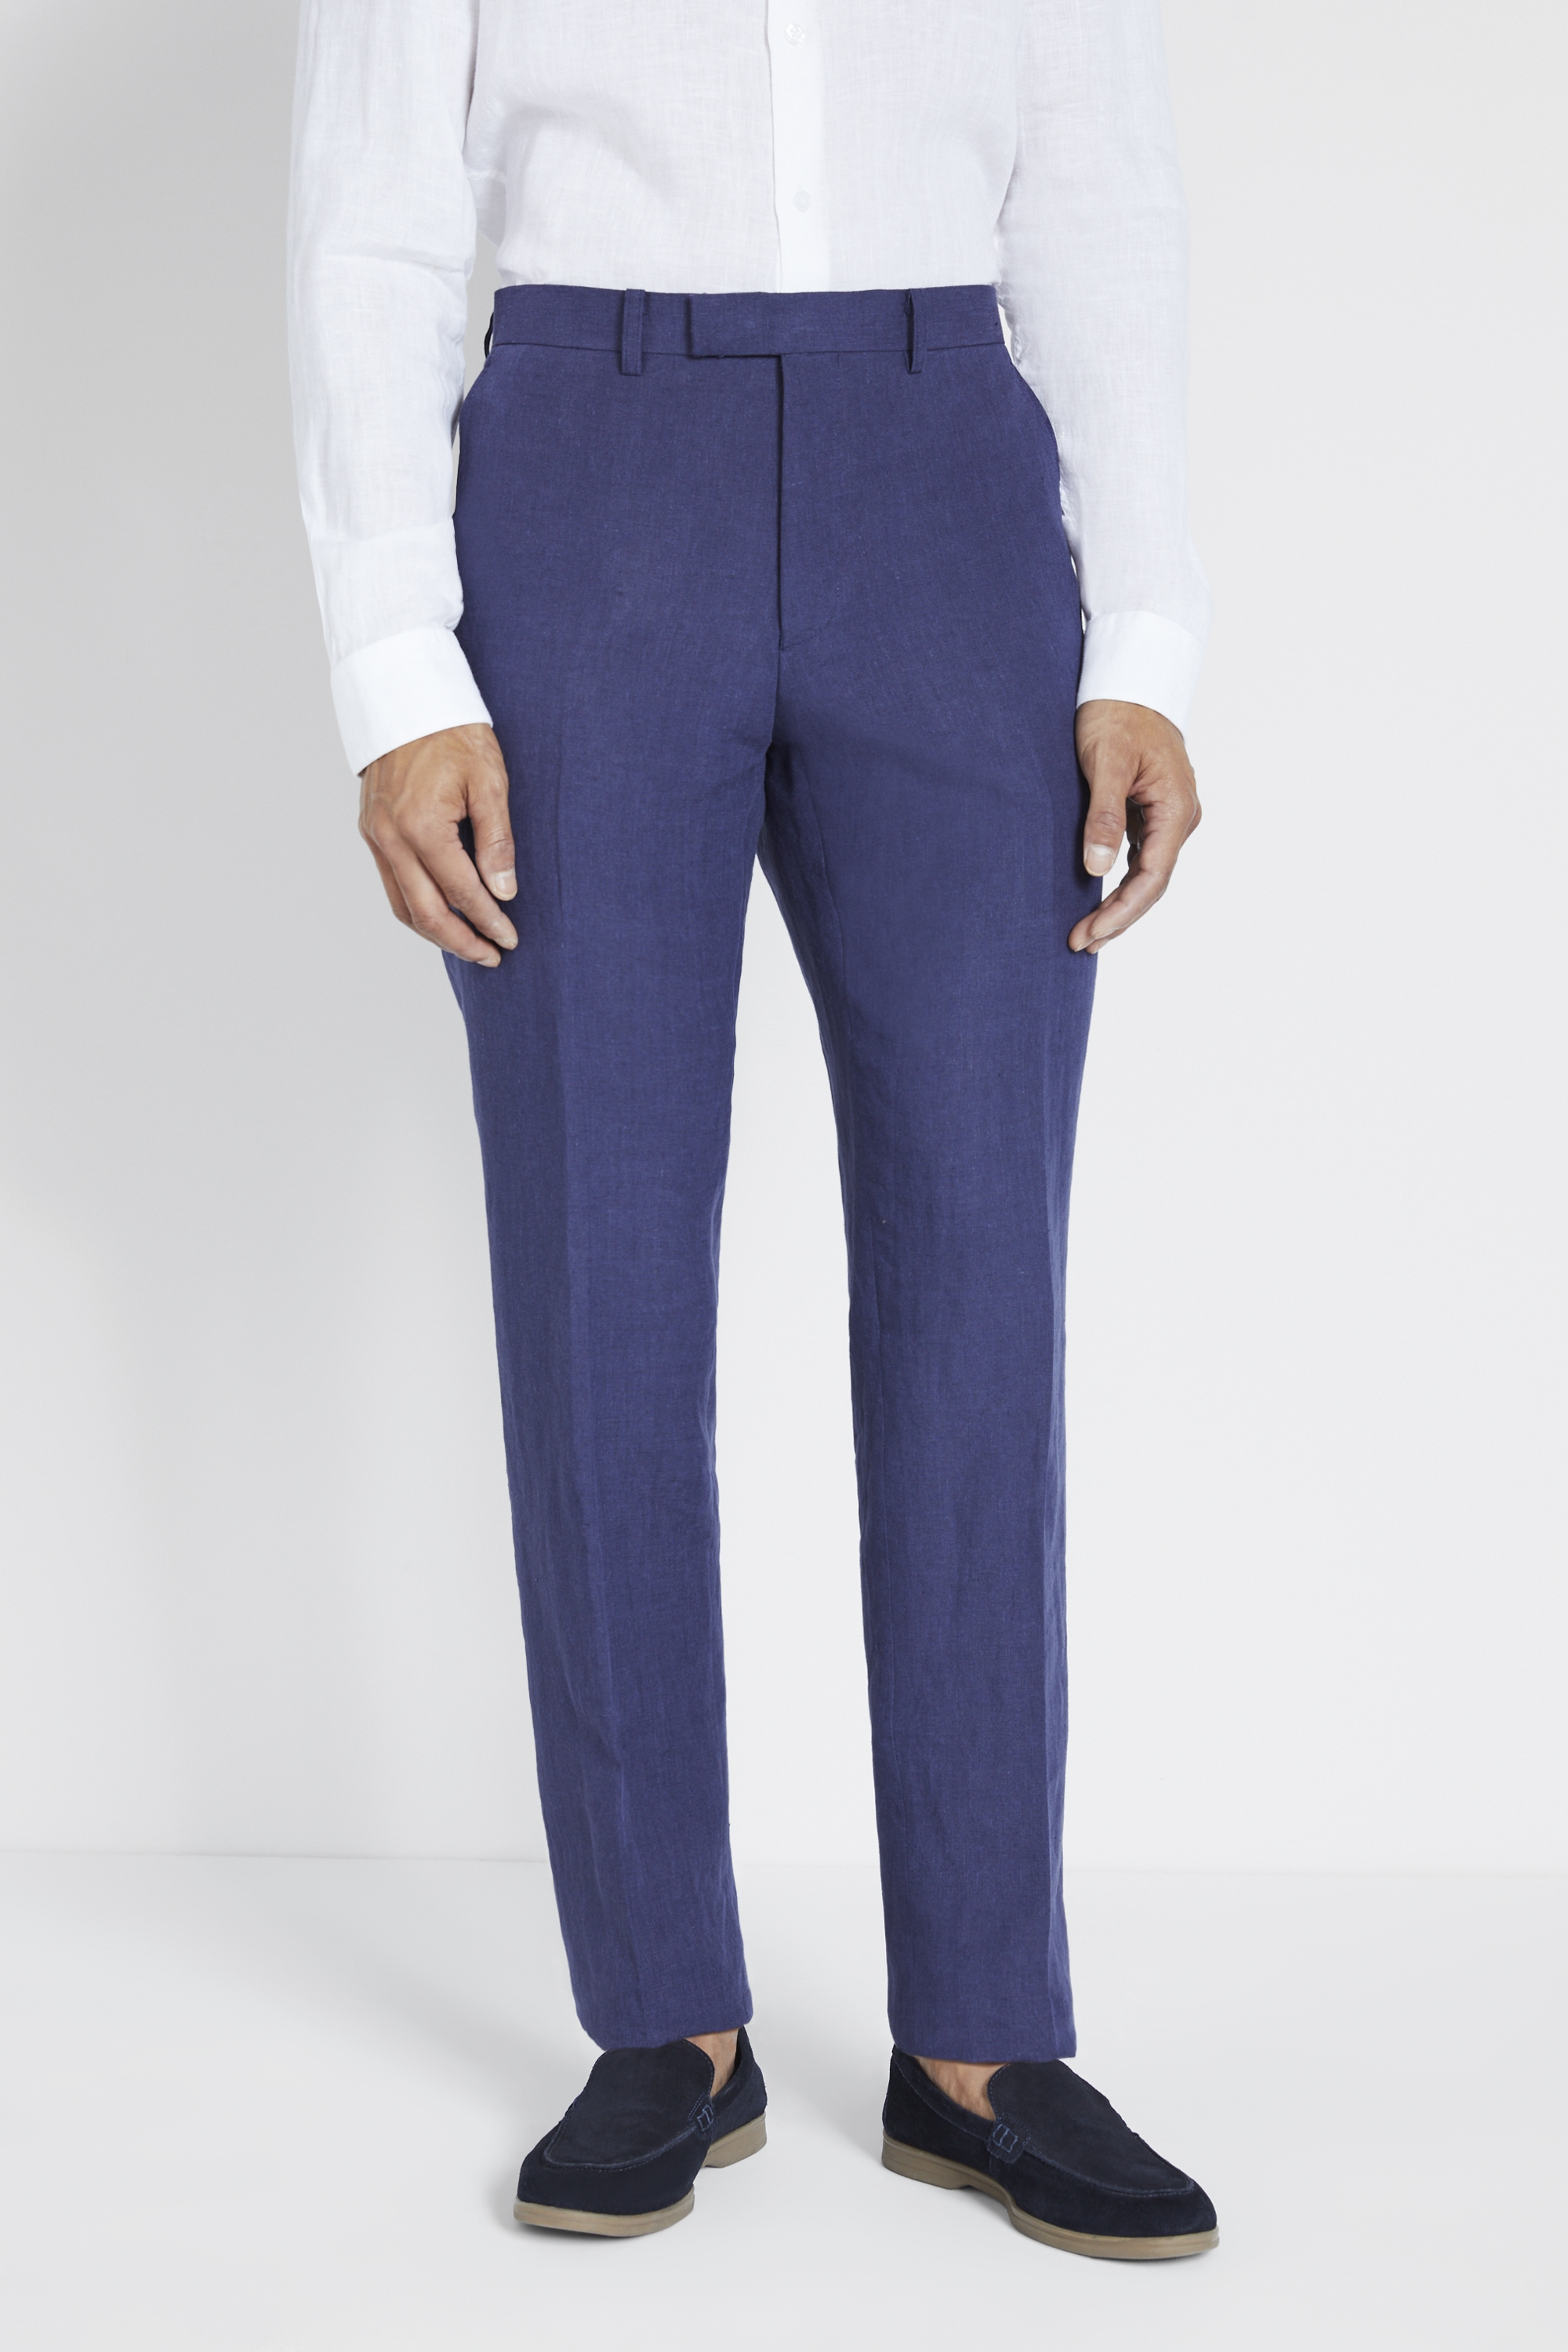 Tailored Fit Indigo Linen Trousers | Buy Online at Moss